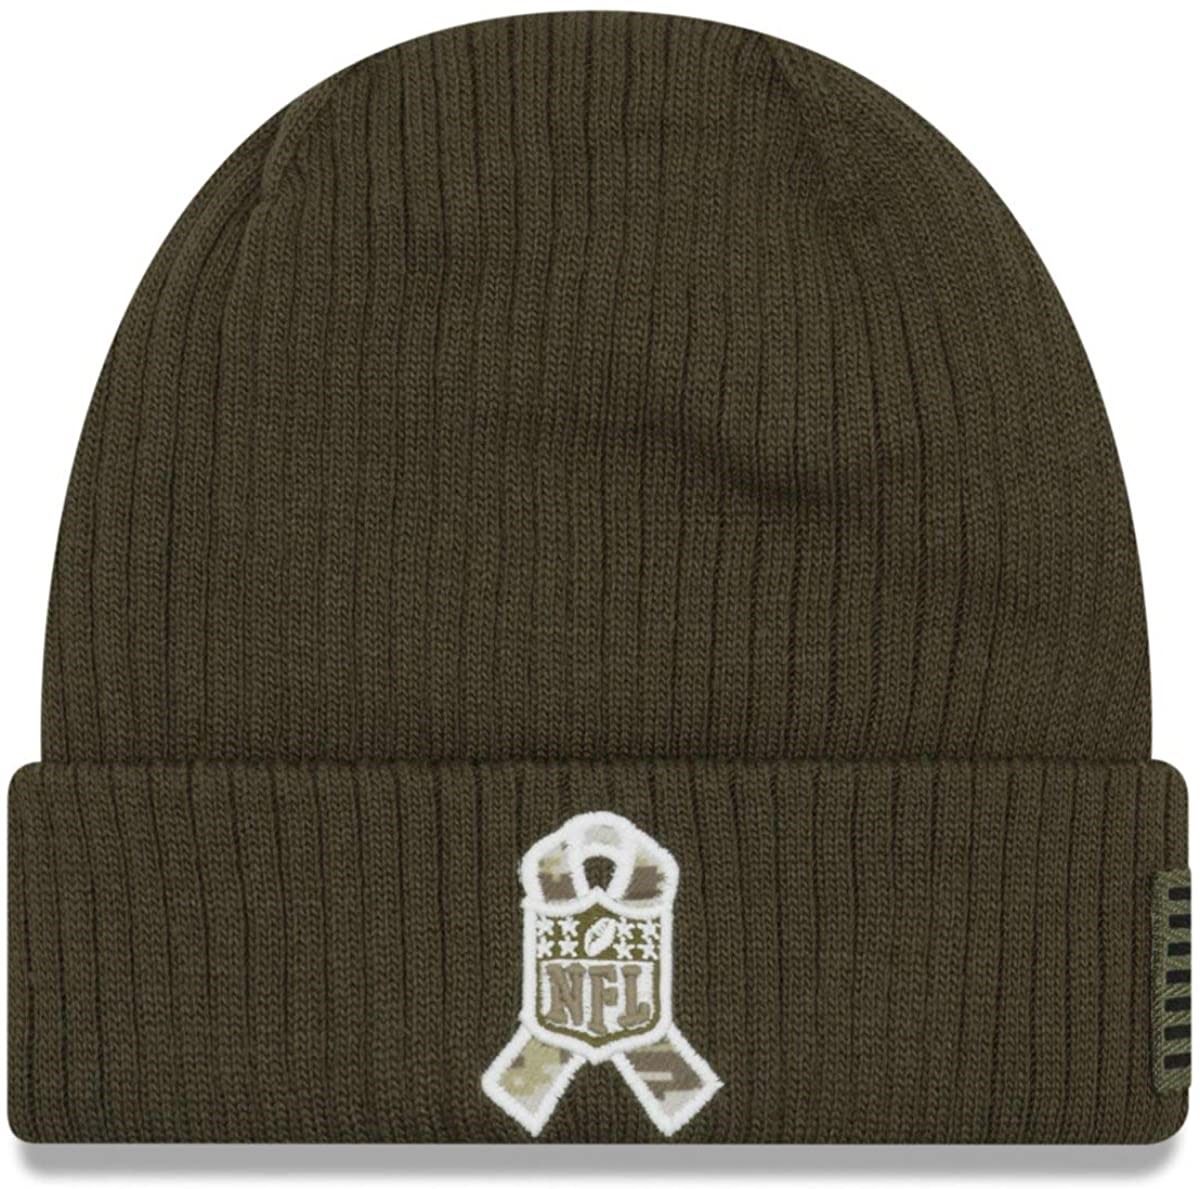 San Francisco 49ers On Field 2018 Salute To Service Knit Beanie New Era